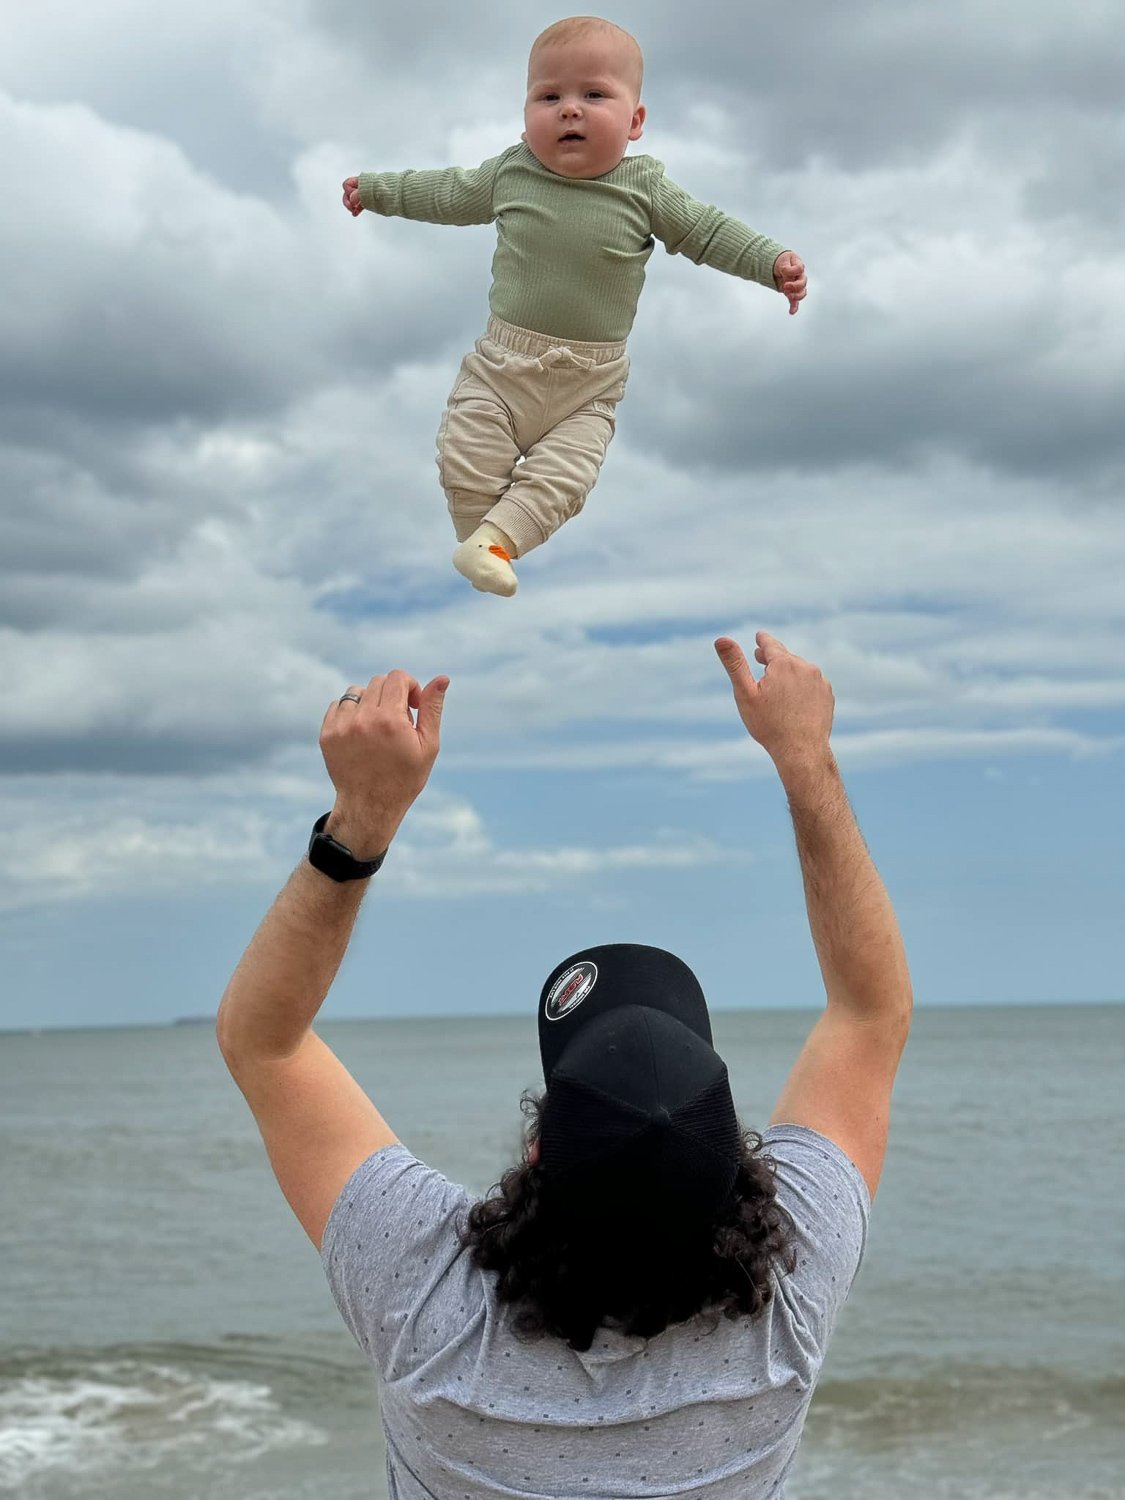 A man tossing a baby boy high above his head